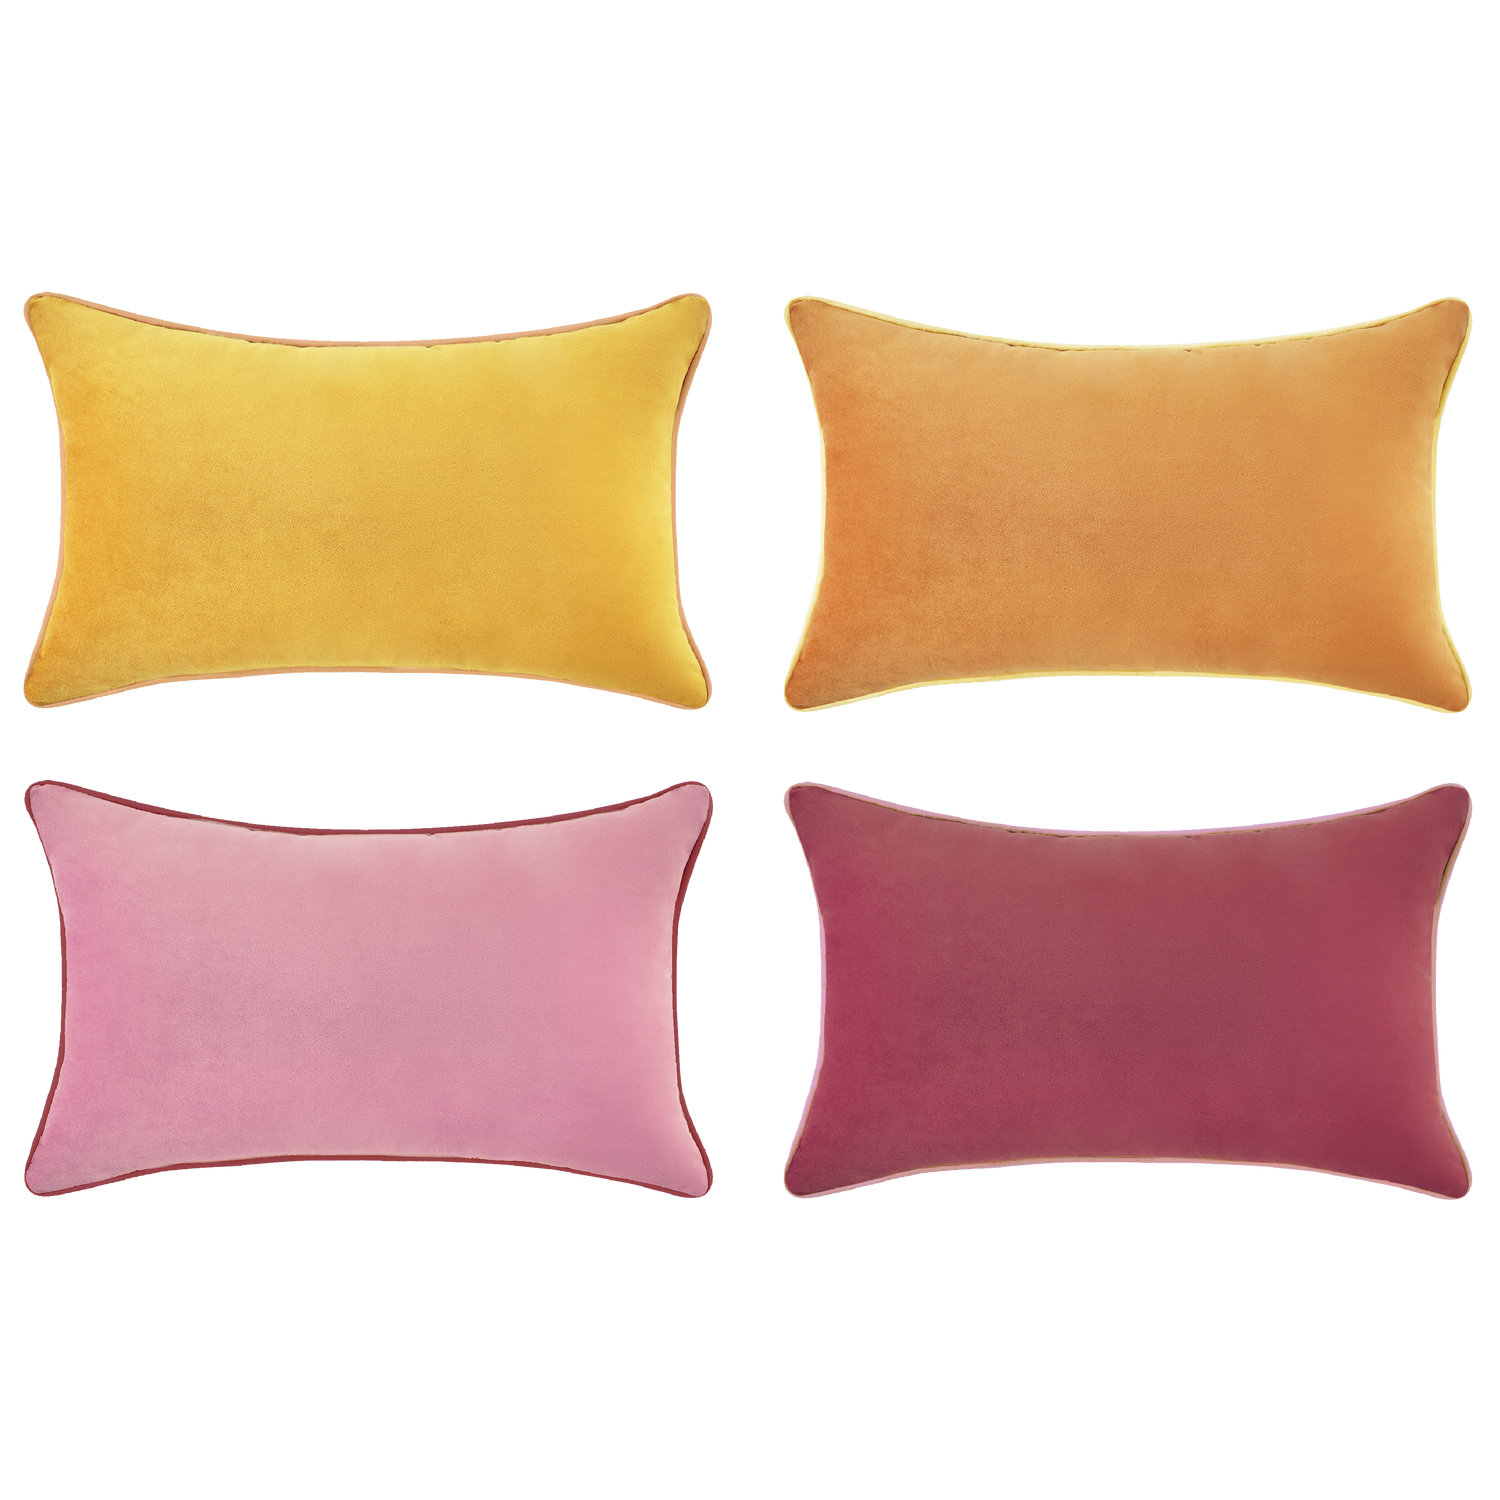 yellow ochre pink decorative throw pillow covers piping soft reversible rectangle home decor